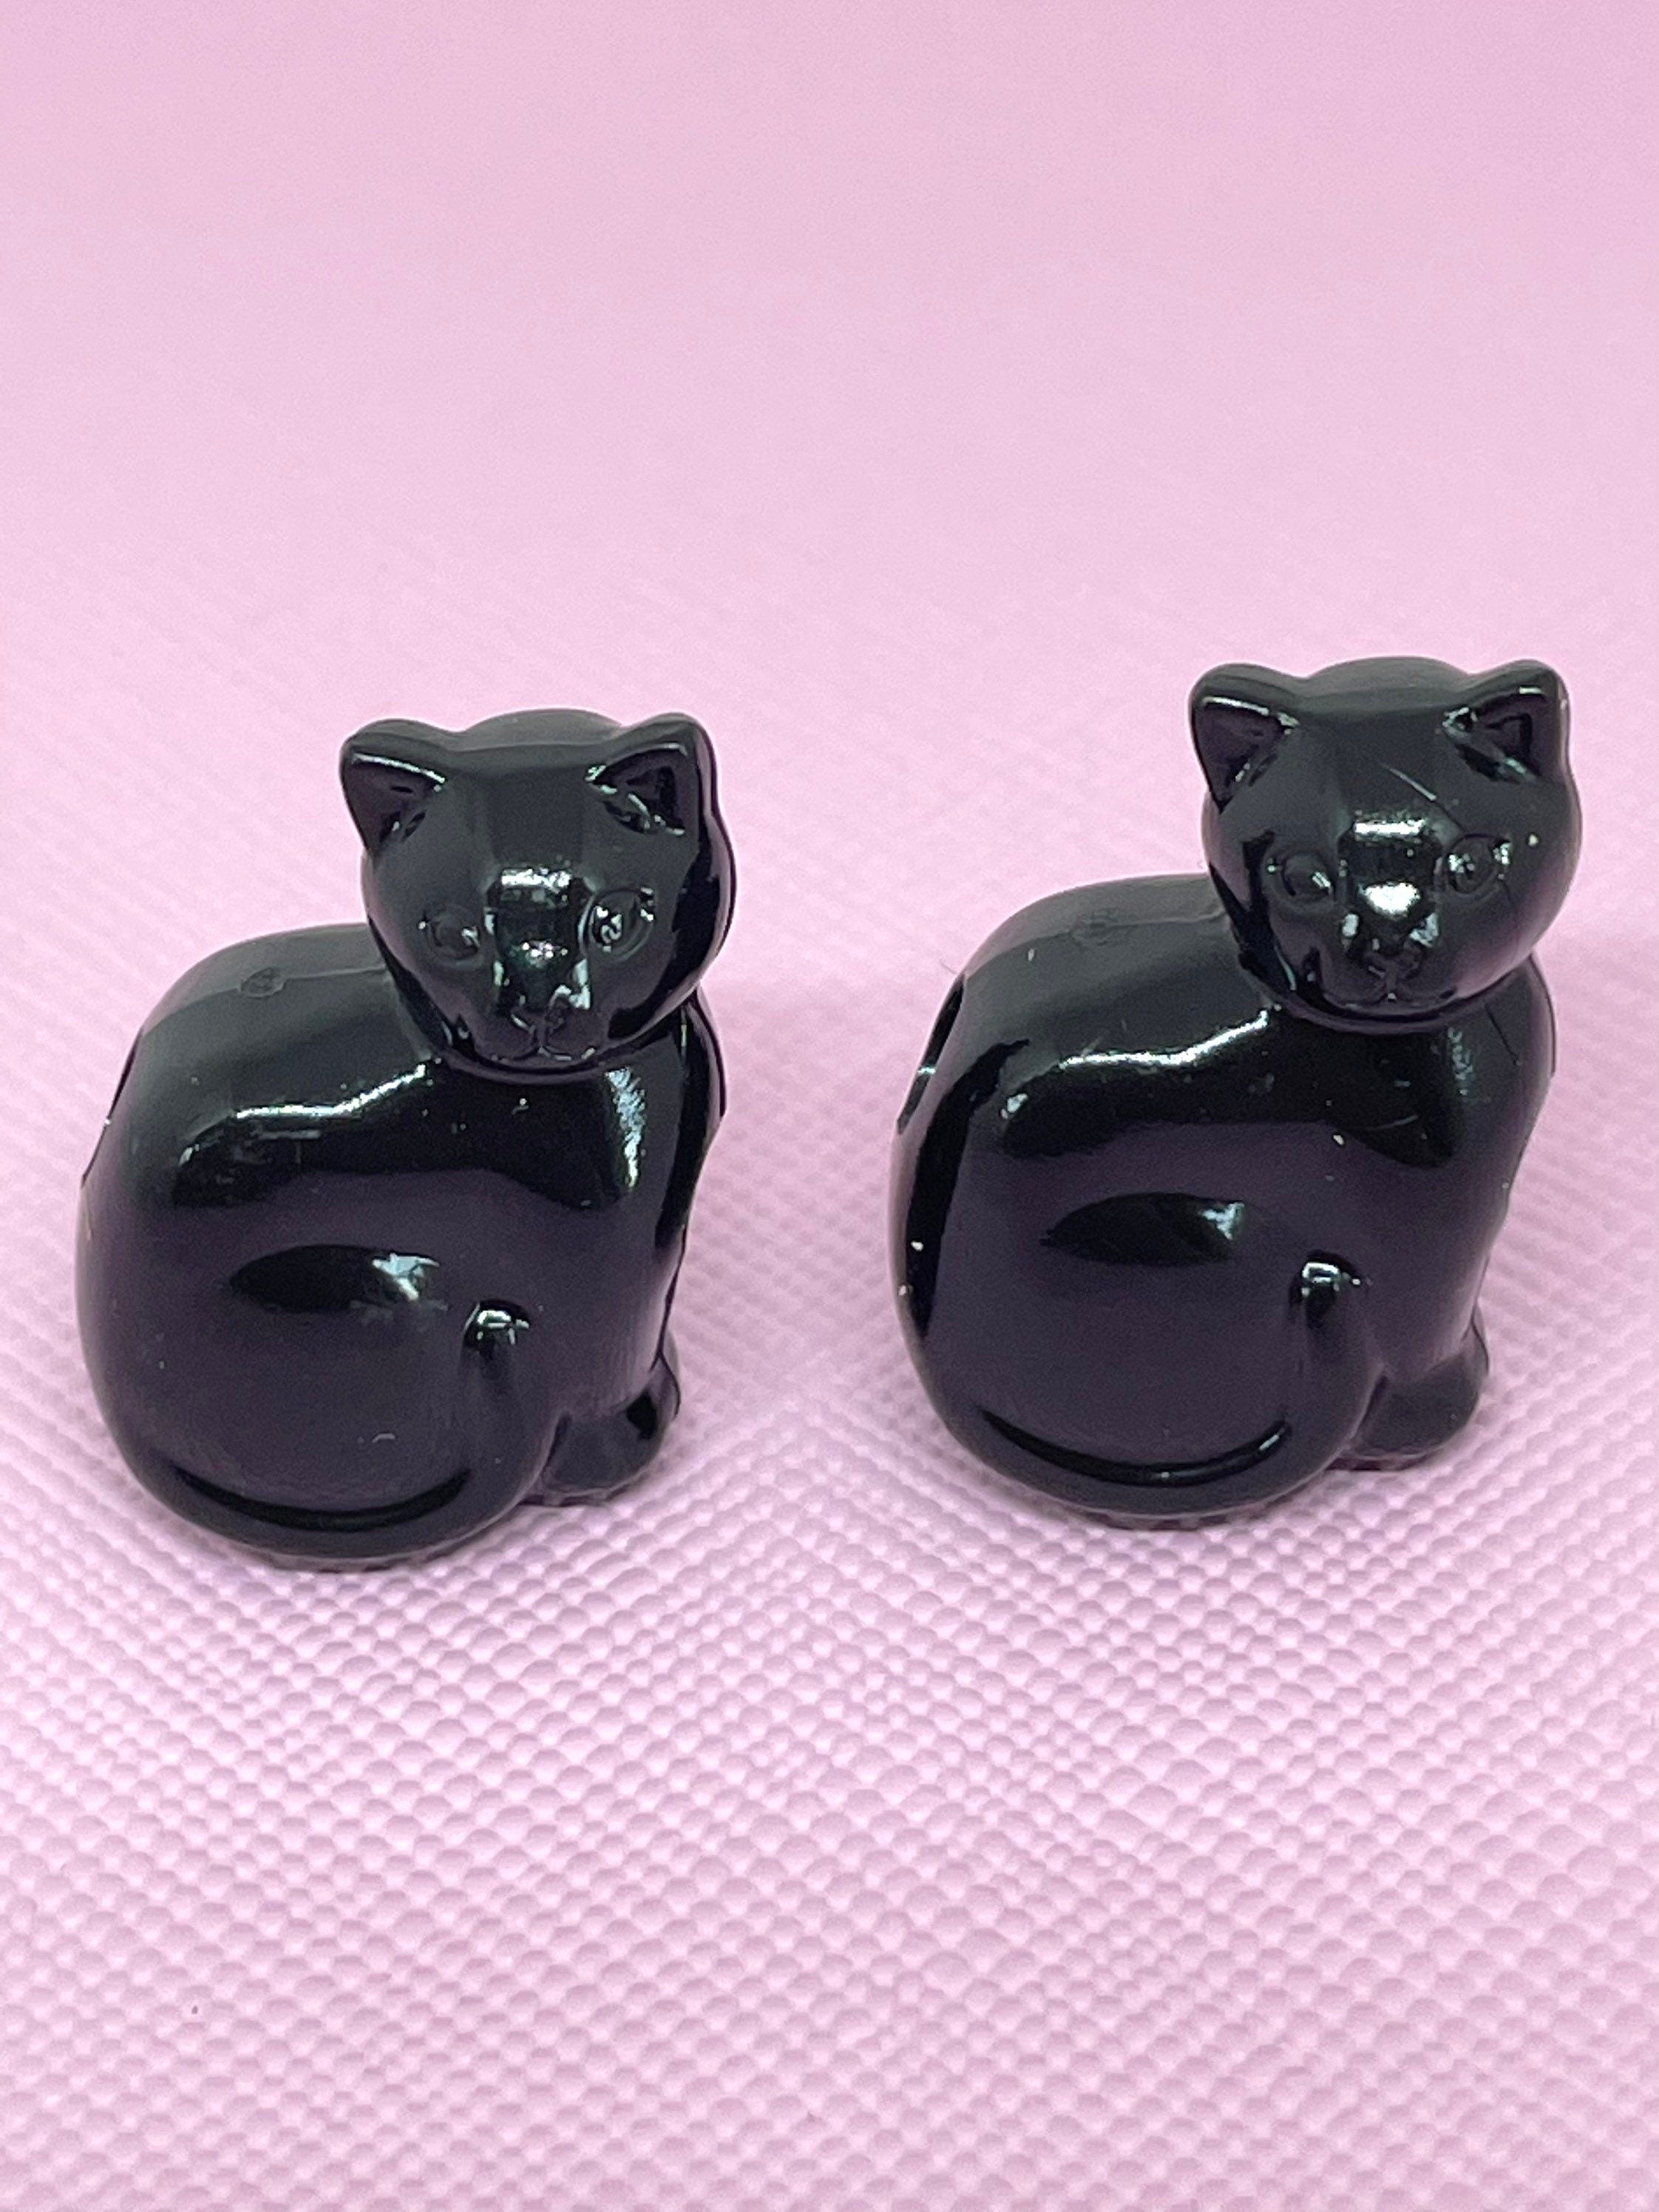 Black Cat Beads, Animal Beads for Jewelry, Black Pet Beads, Black Halloween Beads for Crafts, Halloween Themed Beads